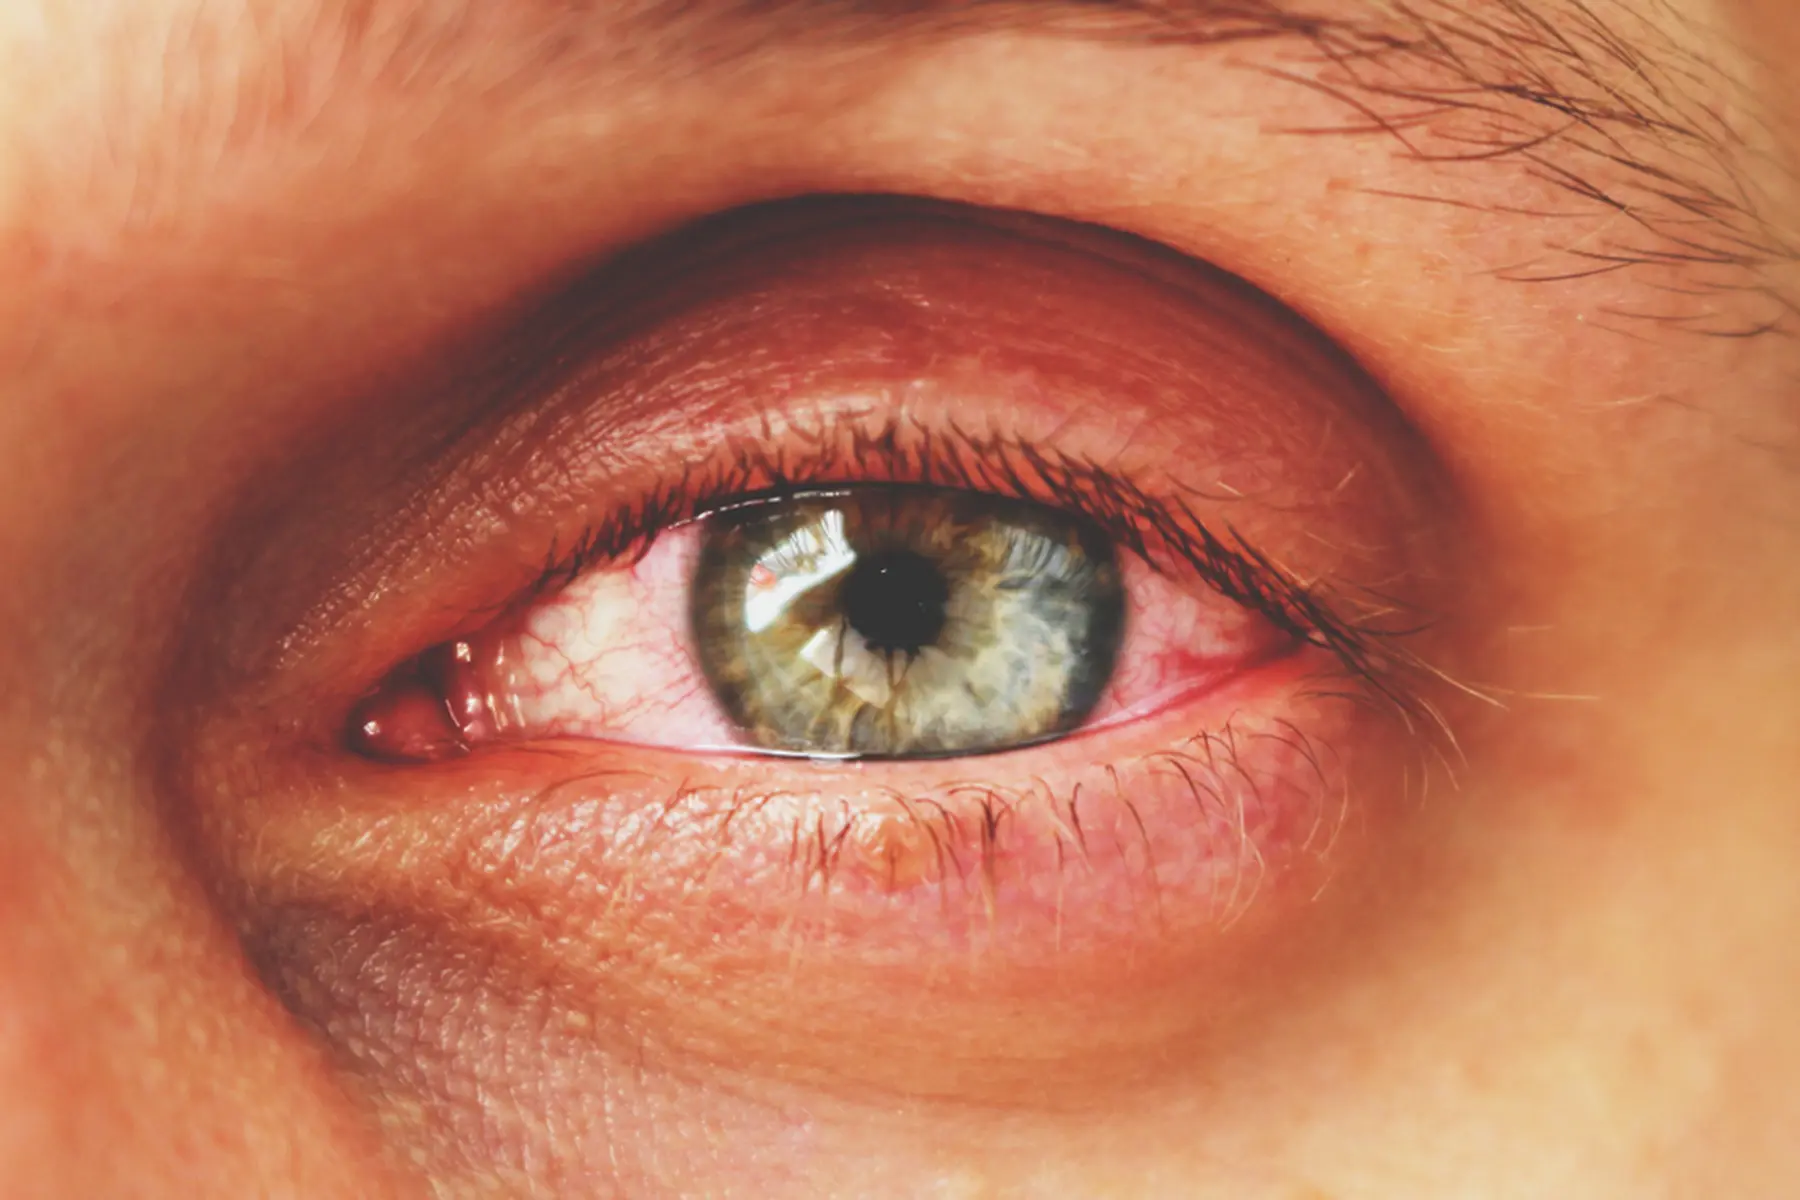 Close-up of a person's eye. The eye looks very inflamed and irritated. It is red and puffy. 